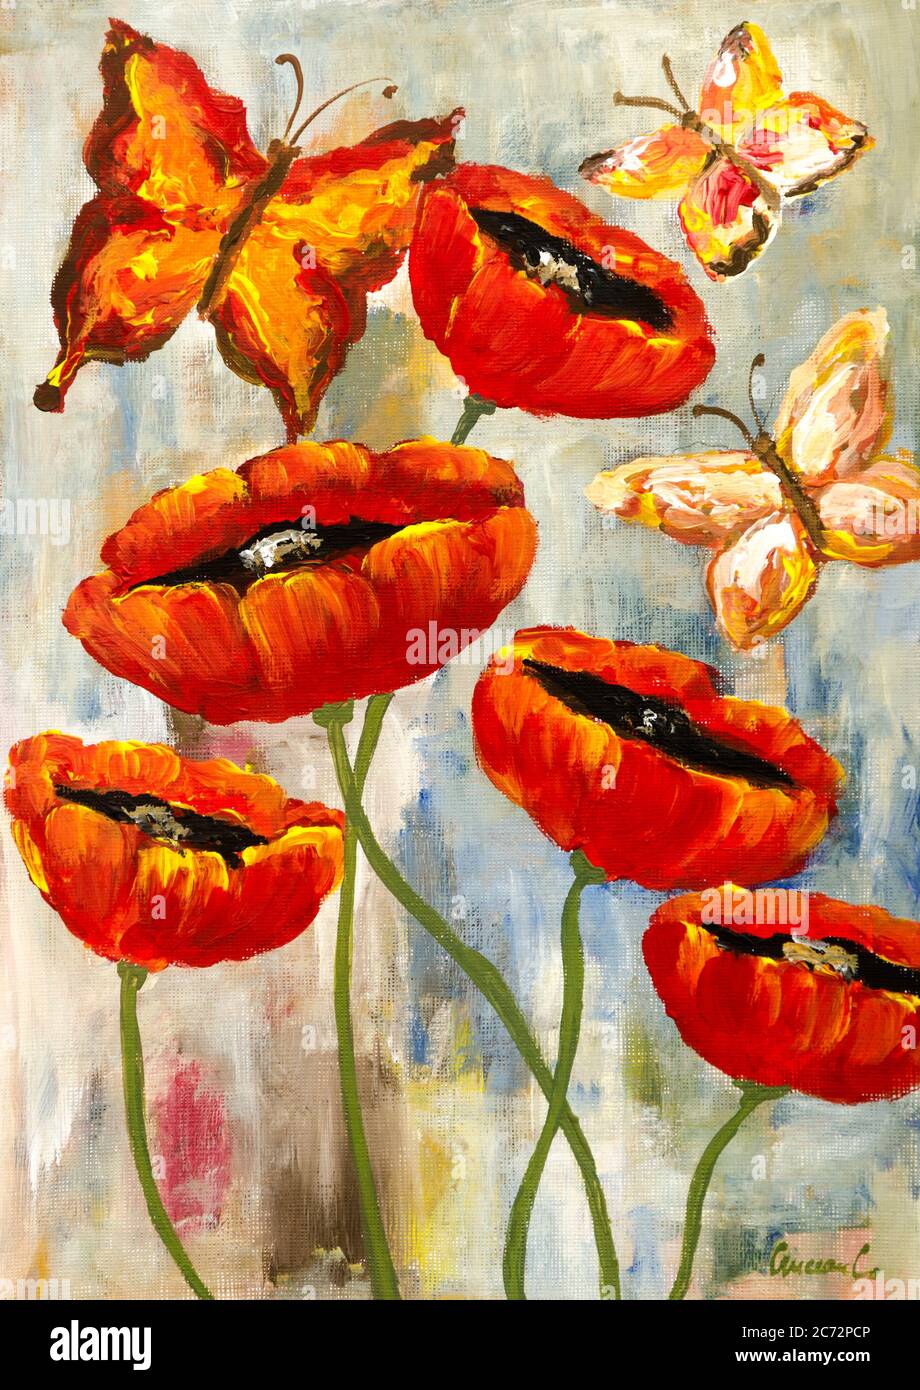 Canvas Painting Contemporary Floral Oil Painting Original Floral Art Poppies Flowers Painting Oil Painting Flowers Kunst Wall Decor